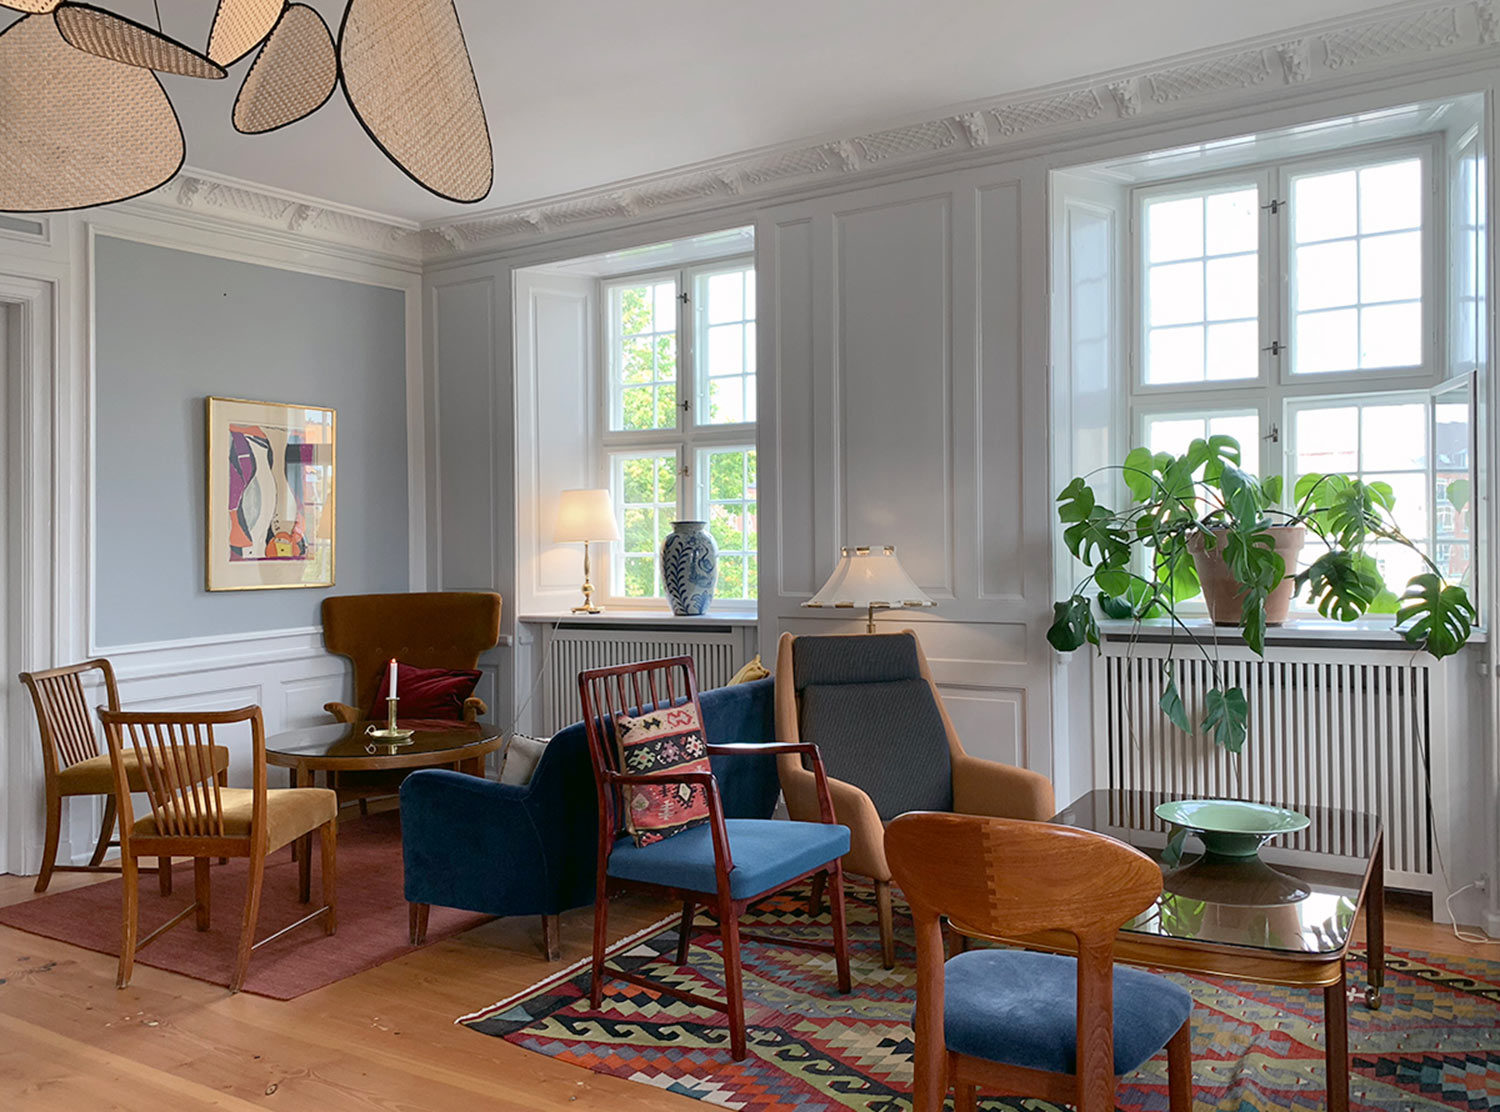 Kanalhuset The designers at EEN Kobenhavn scoured auctions, flea markets, and private collections to furnish the hotel